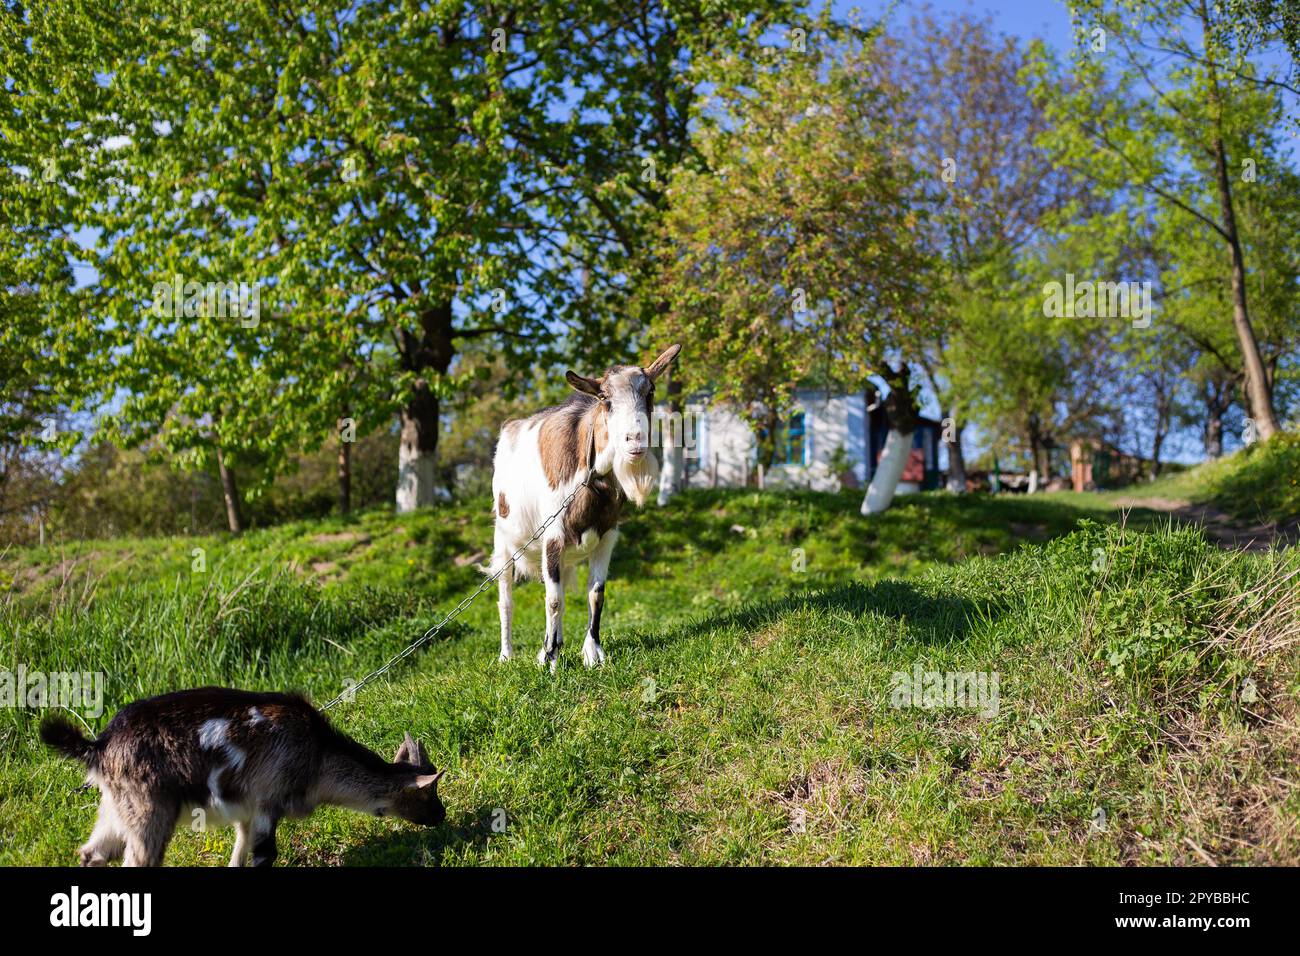 Funny goats standing among the green field, animal grazing. Rural economy. Mom and child. Looking into the camera. Stock Photo